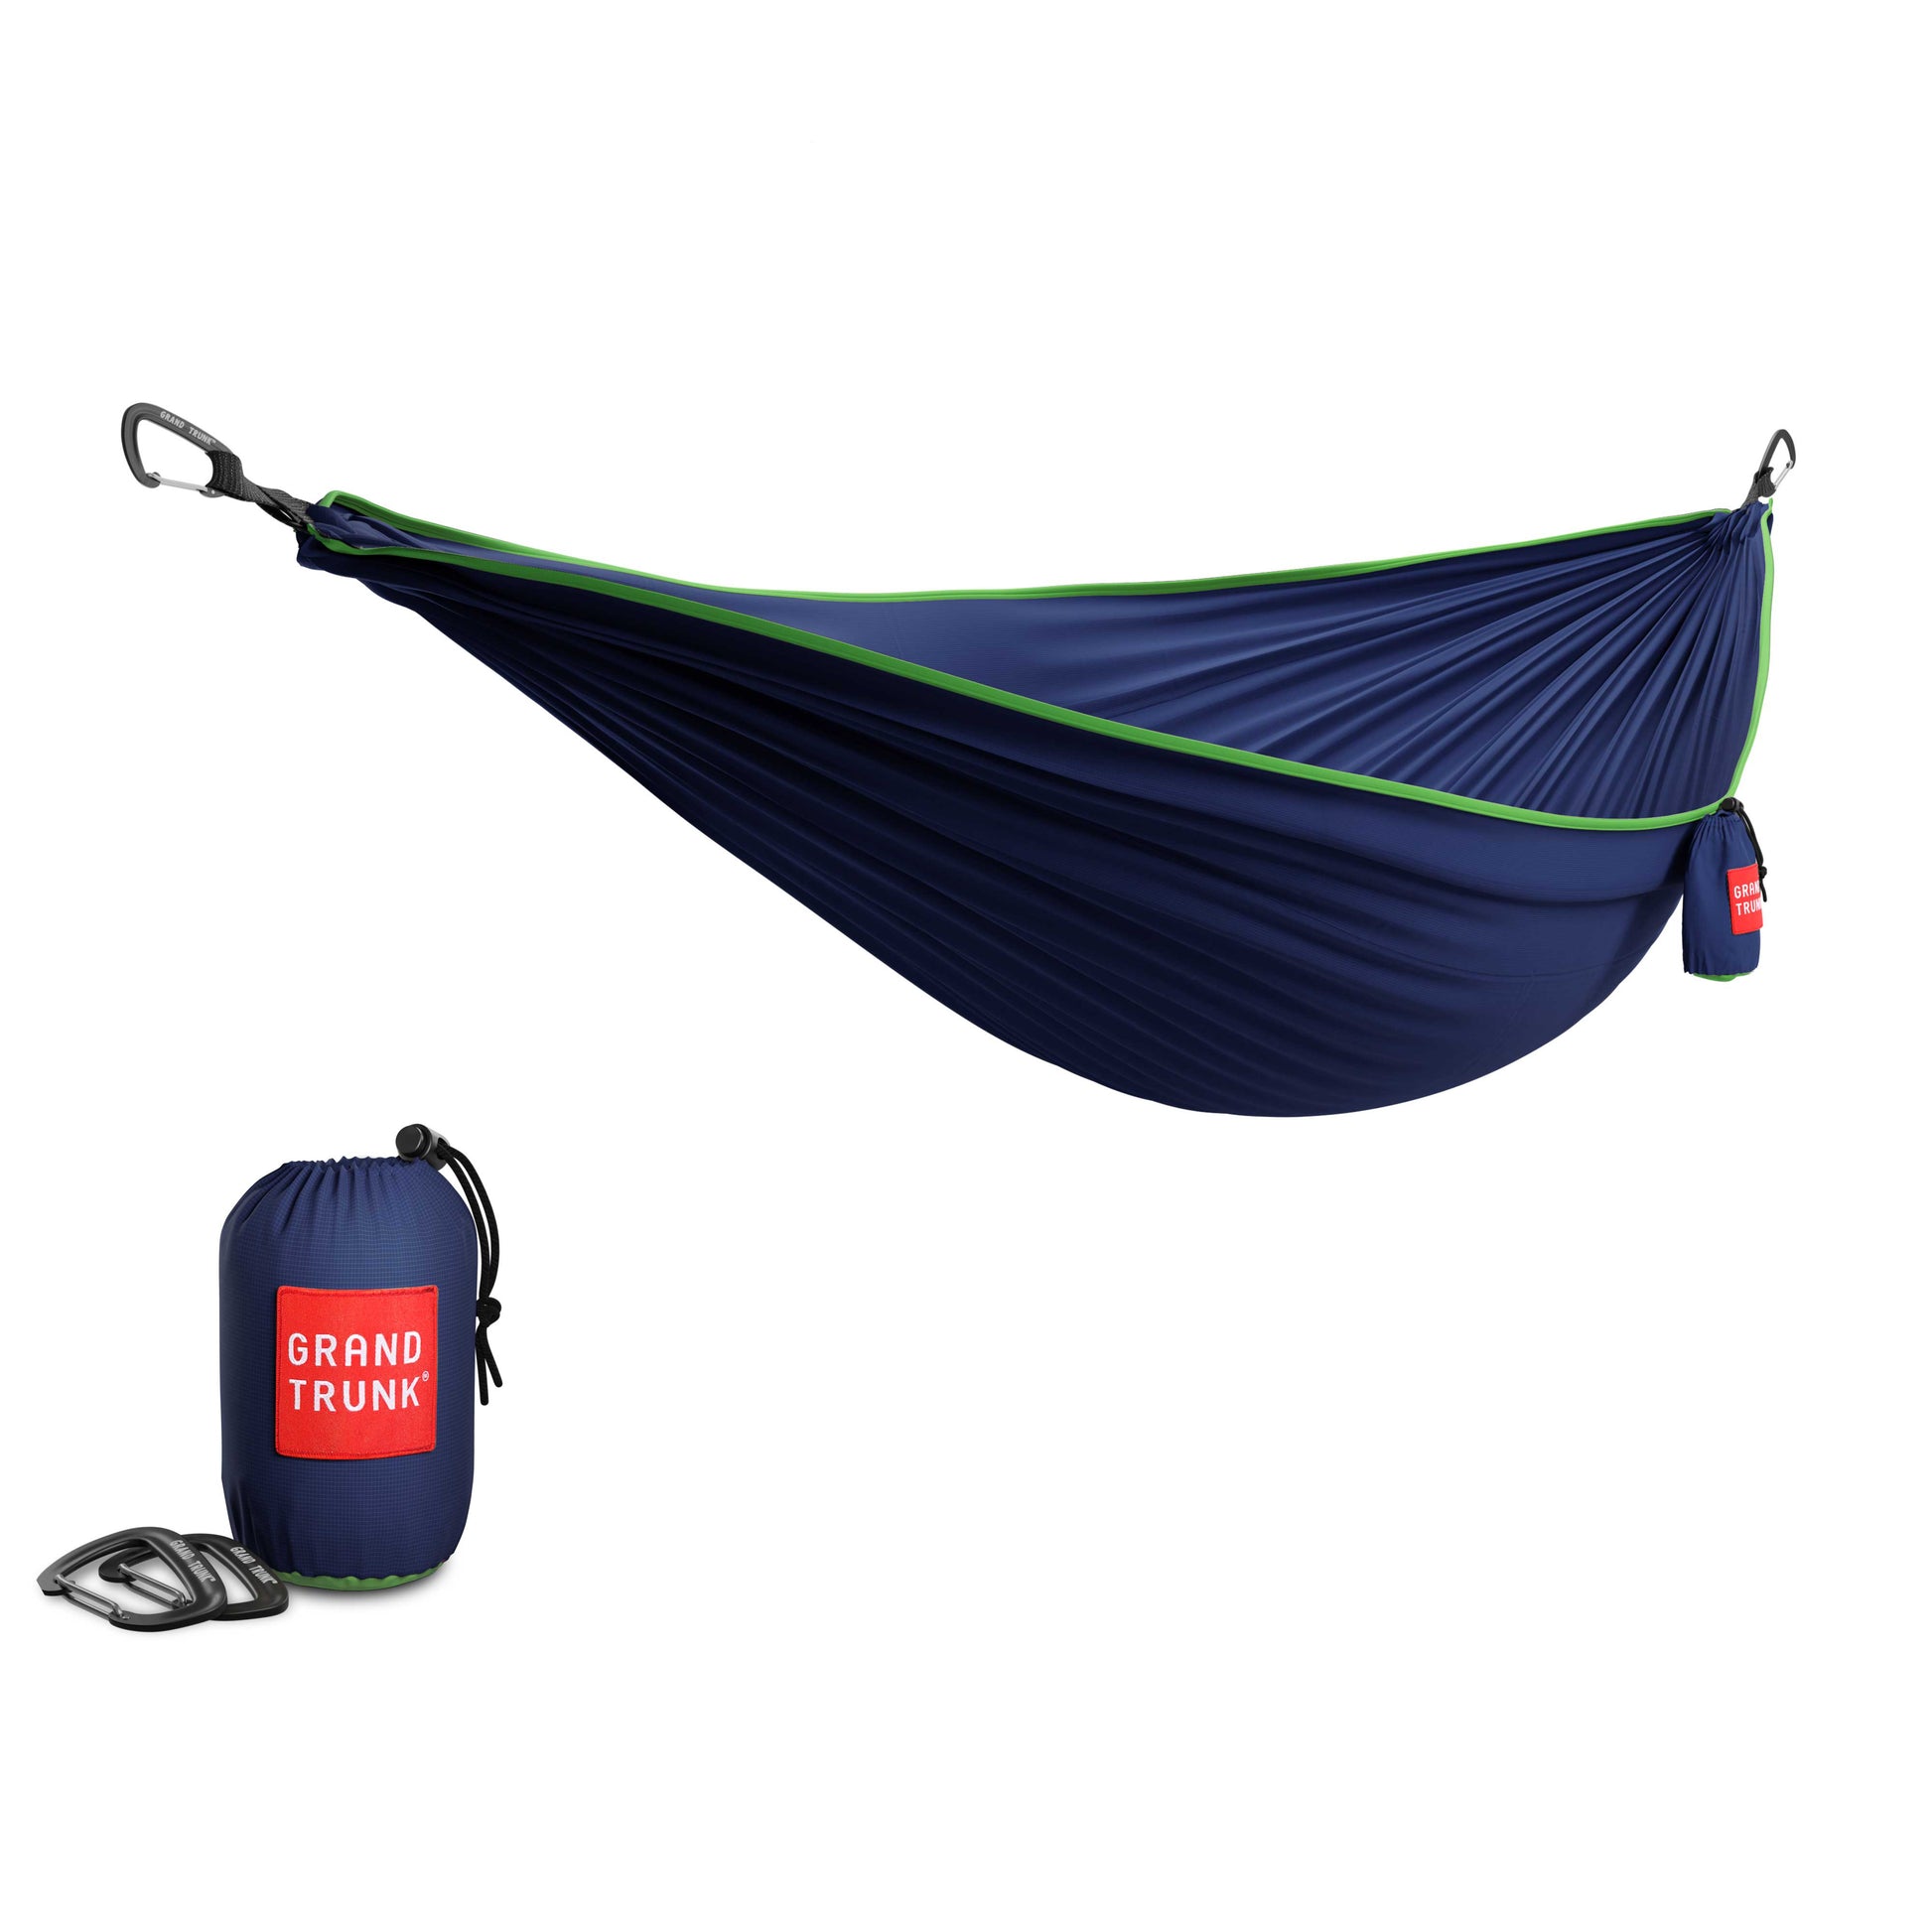 TrunkTech™ Double Hammock SOLID COLOUR Navy / Lime Green TT-31-41-01